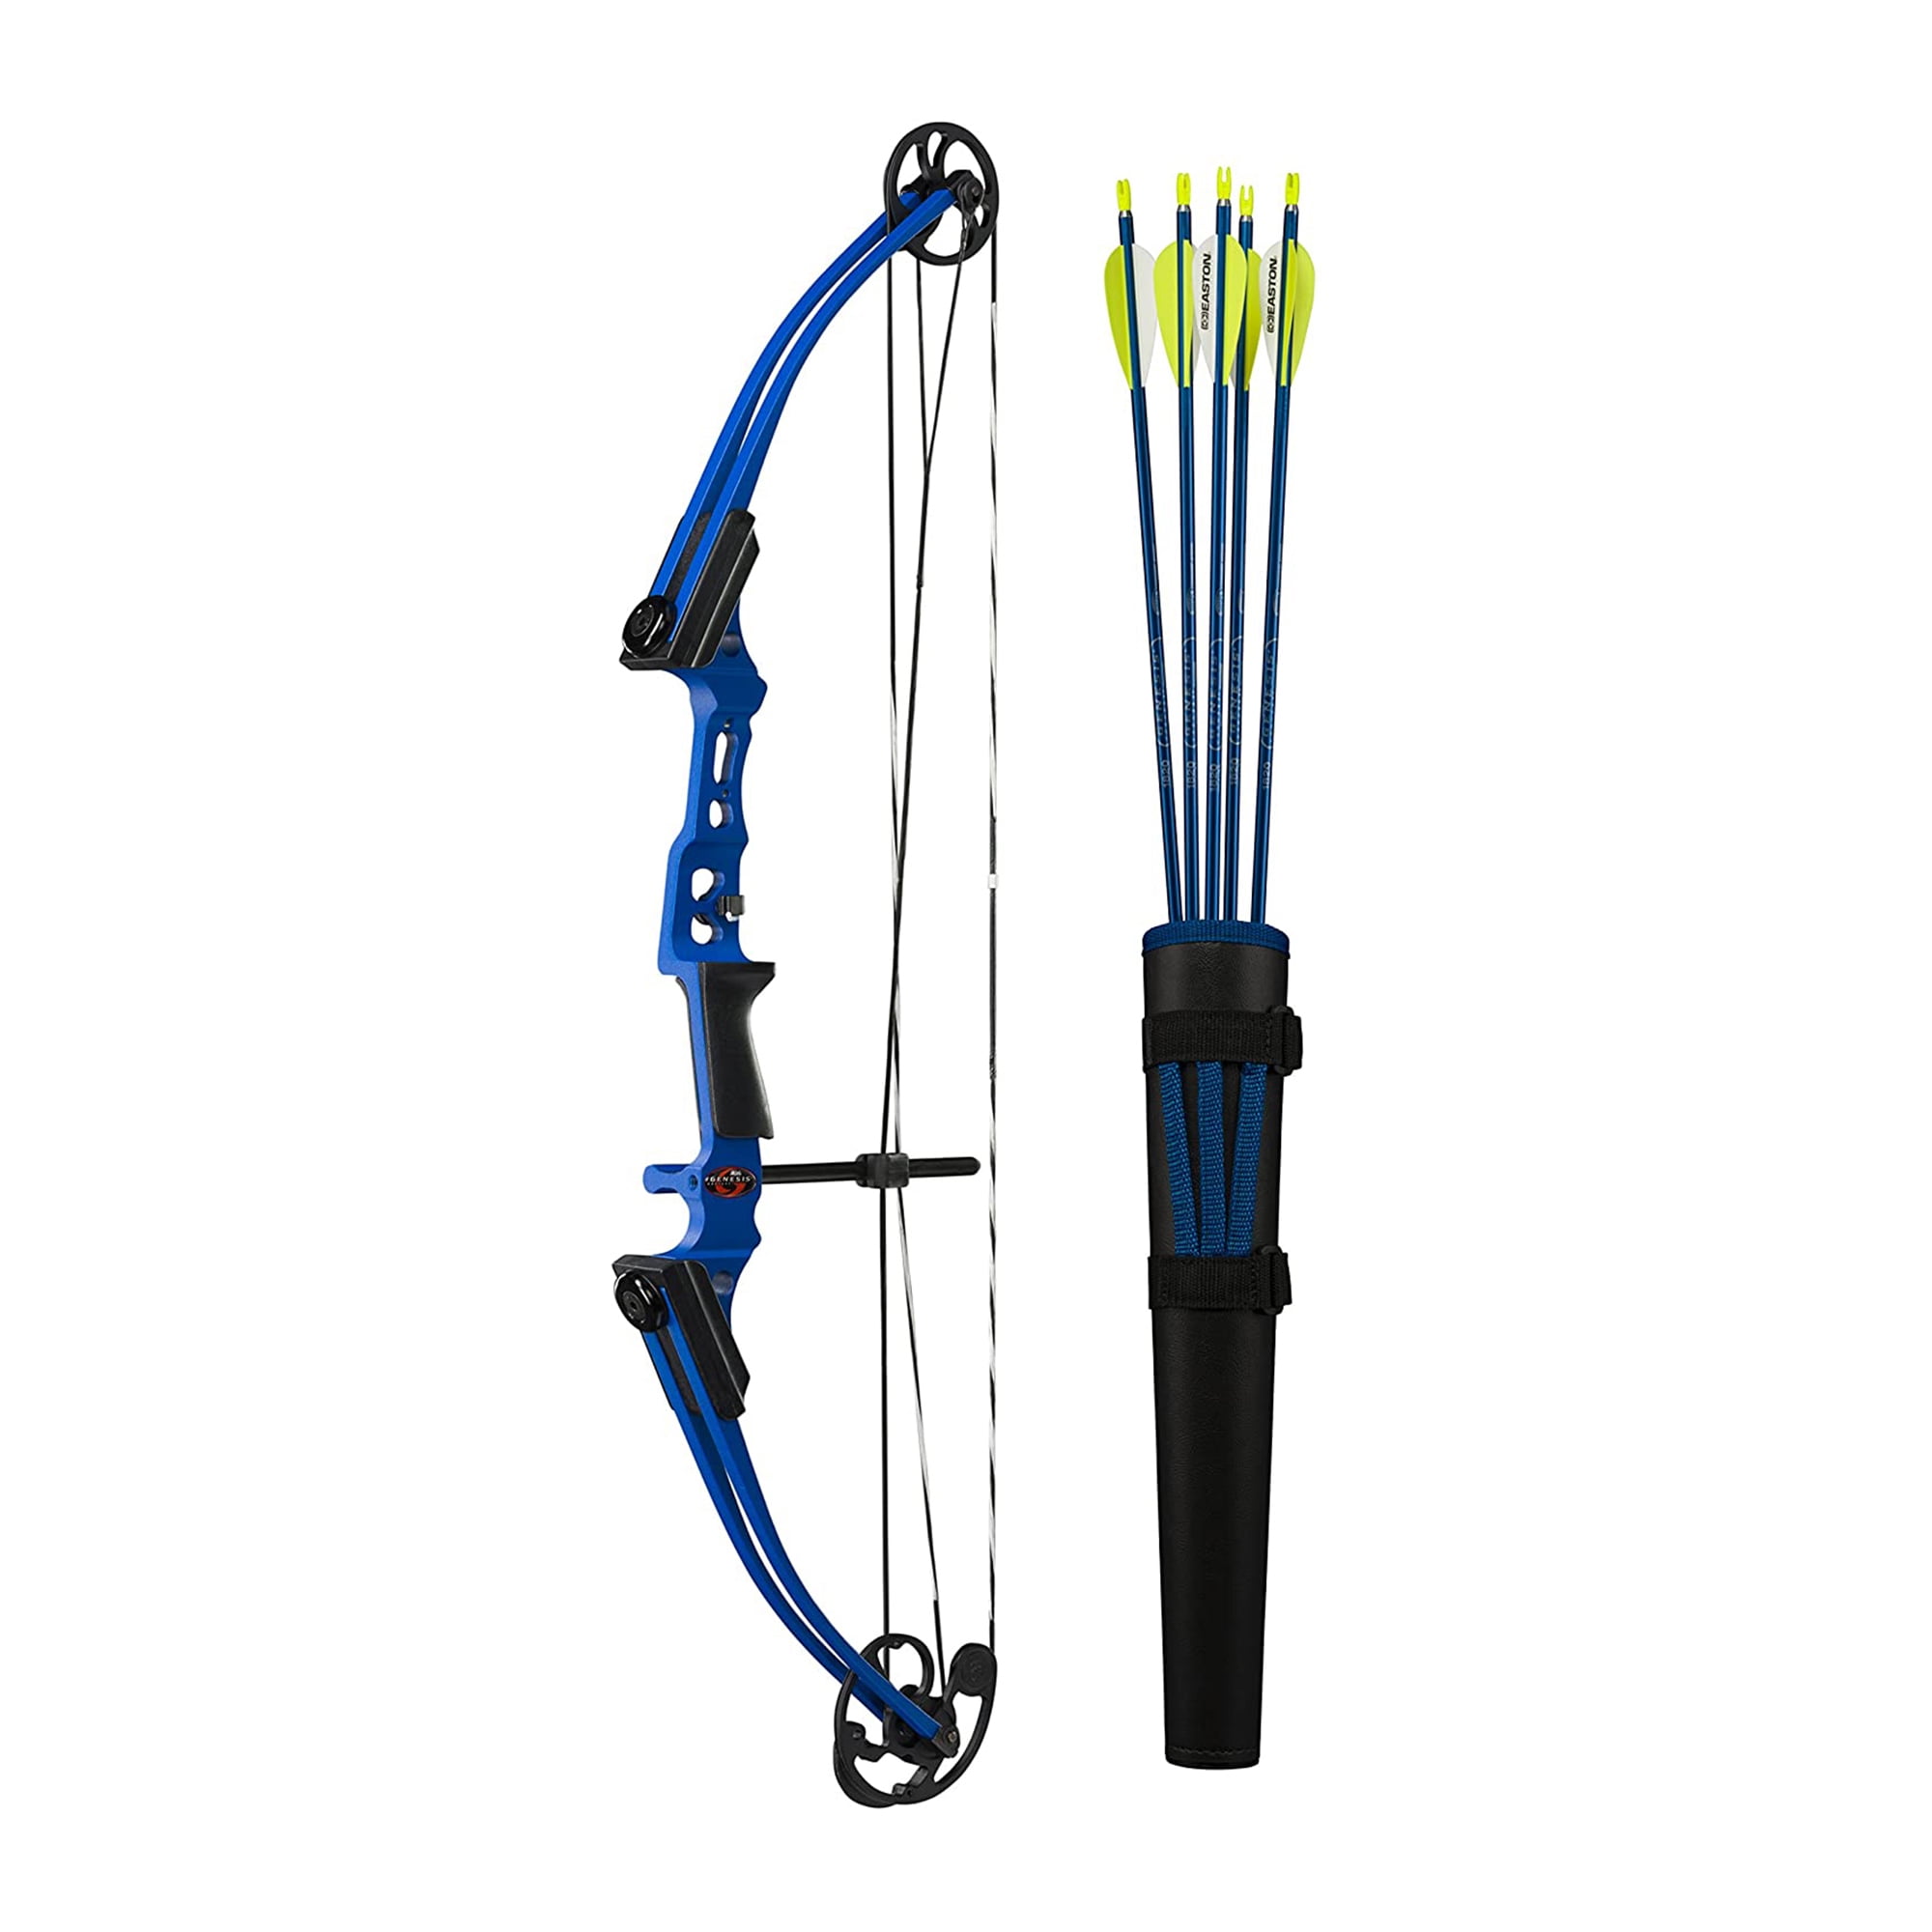 Details about   Archery Drop Away Arrow Rest Compound-Bow Hunting Shooting Adjustable Bracket 